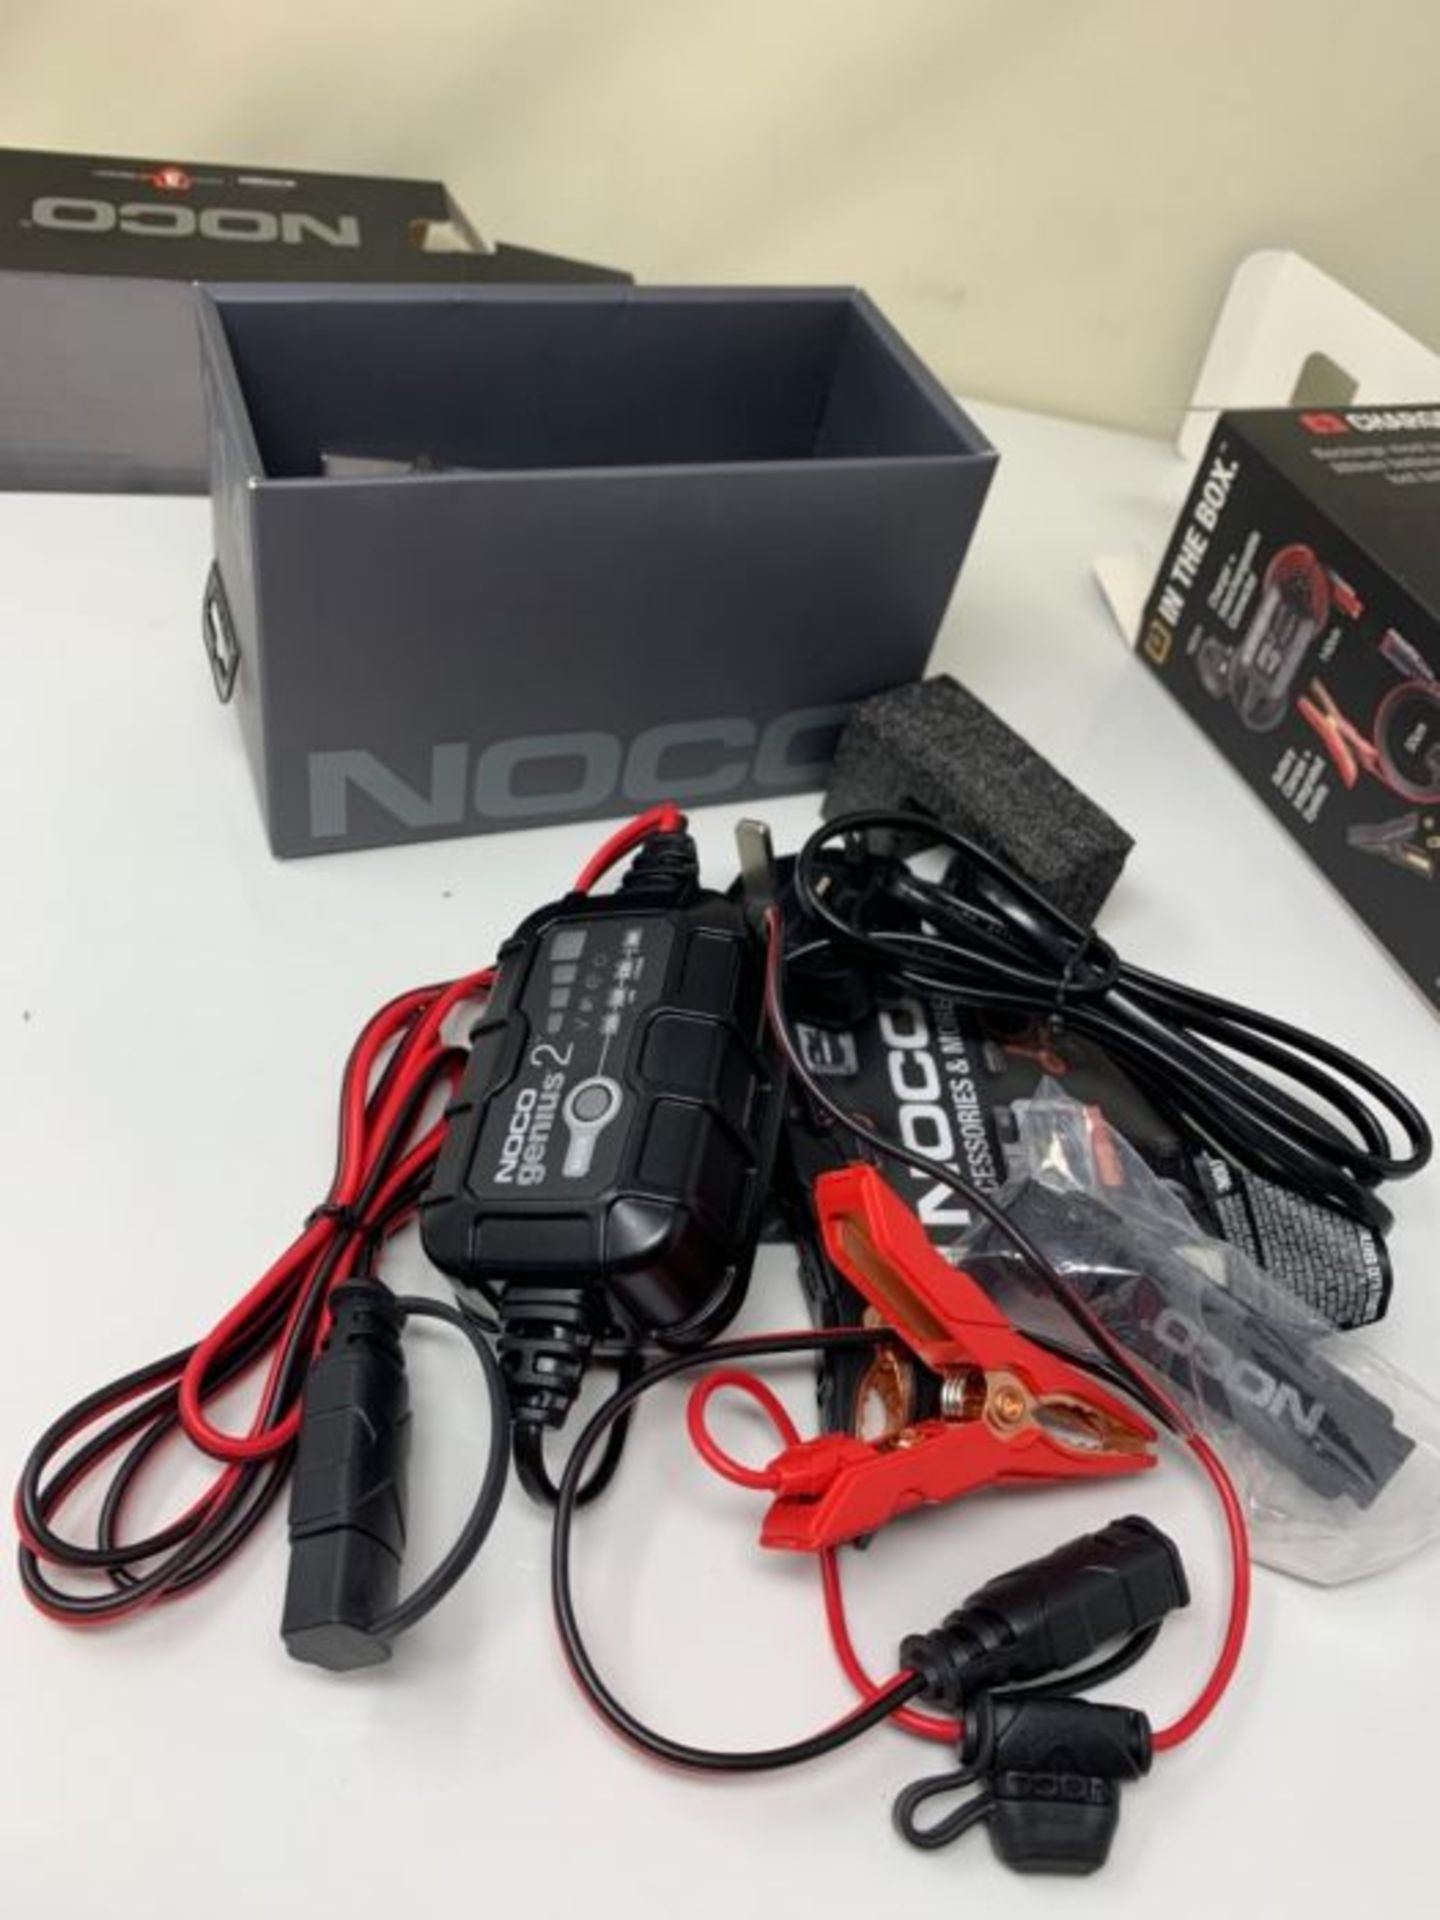 NOCO GENIUS2UK, 2-Amp Fully-Automatic Smart Charger, 6V And 12V Battery Charging Units - Image 3 of 3